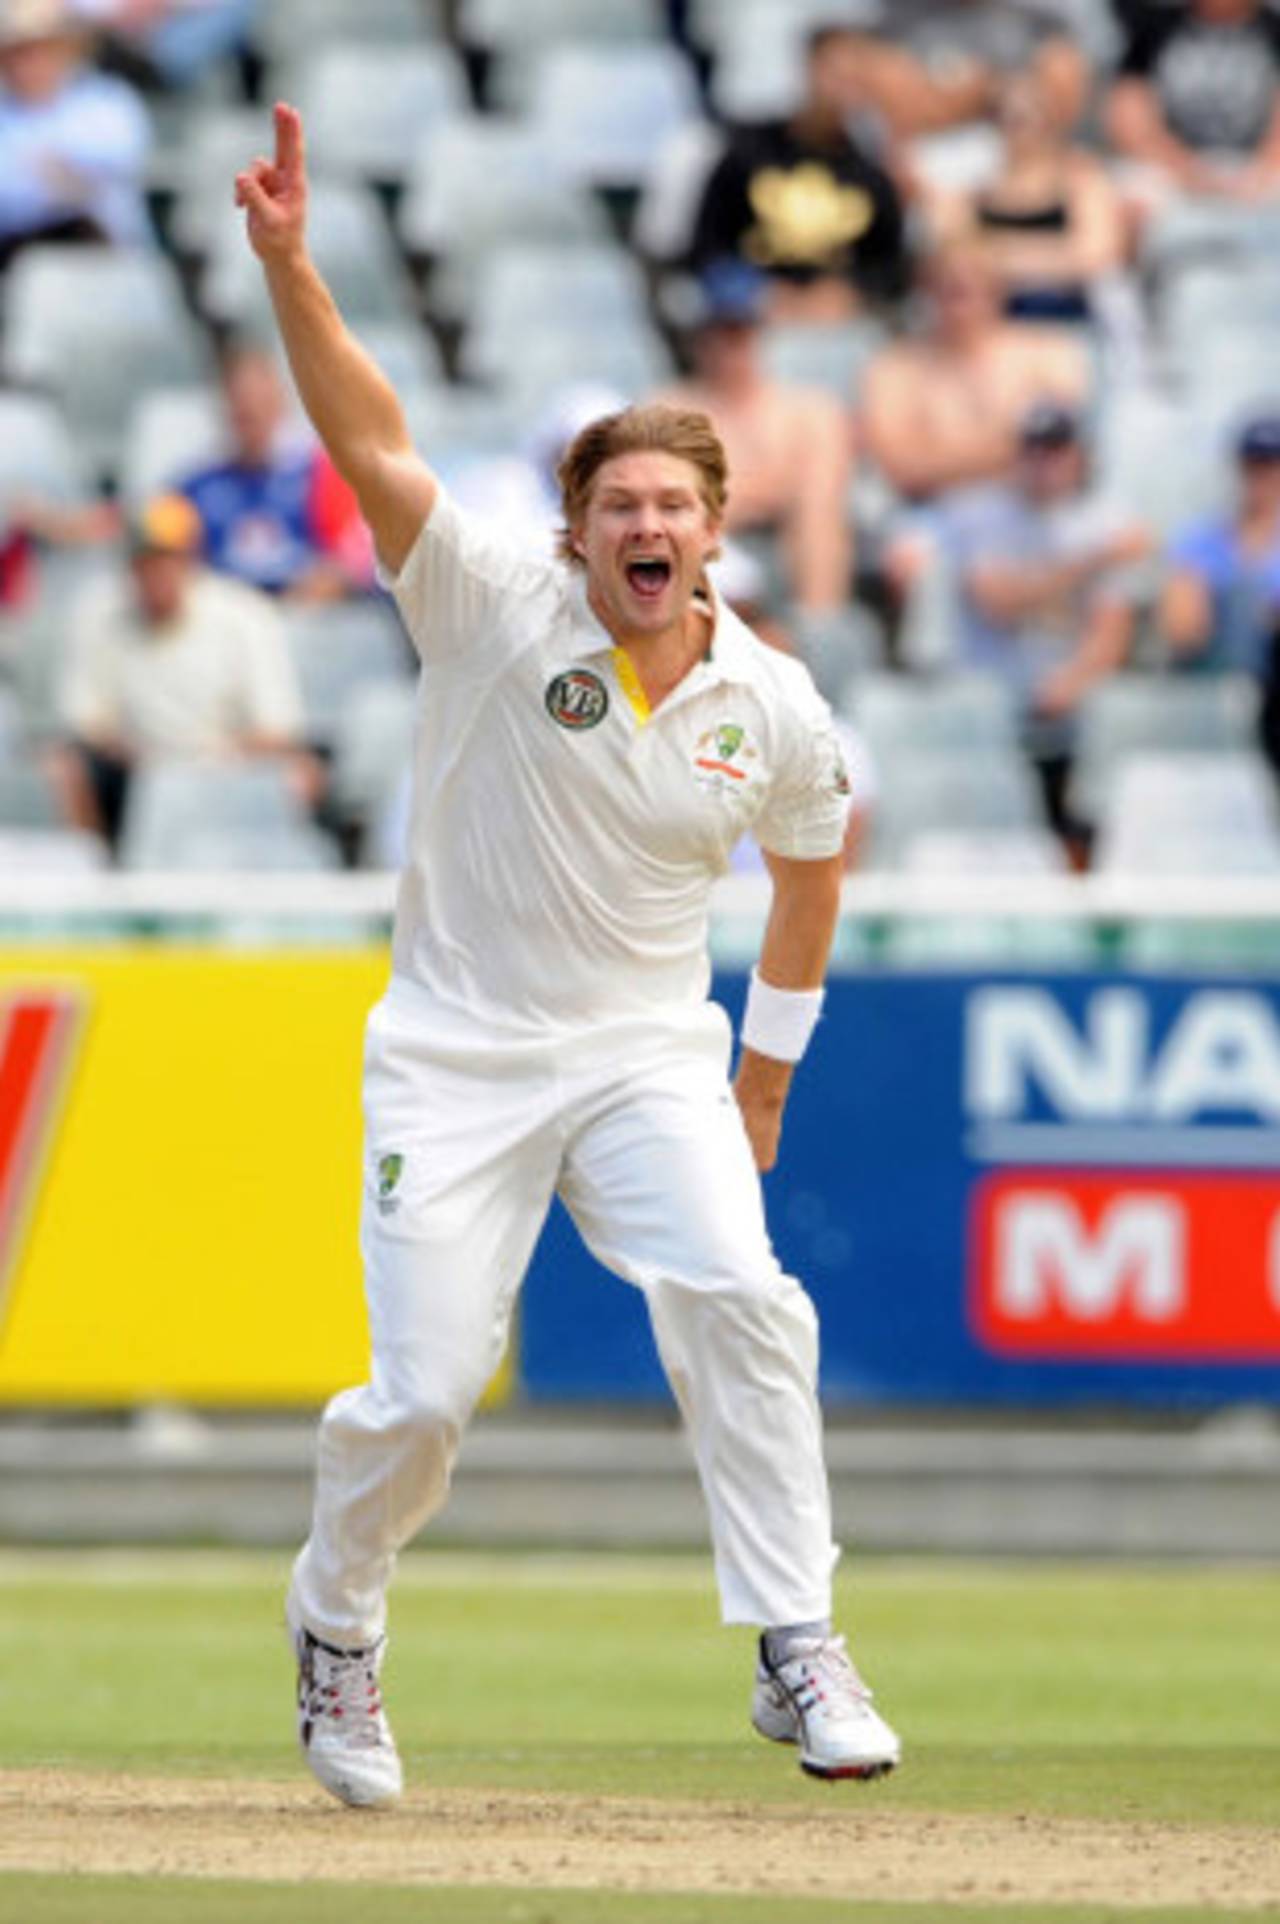 Shane Watson is pumped up after his five-for, South Africa v Australia, 1st Test, Cape Town, 2nd day, November 10, 2011